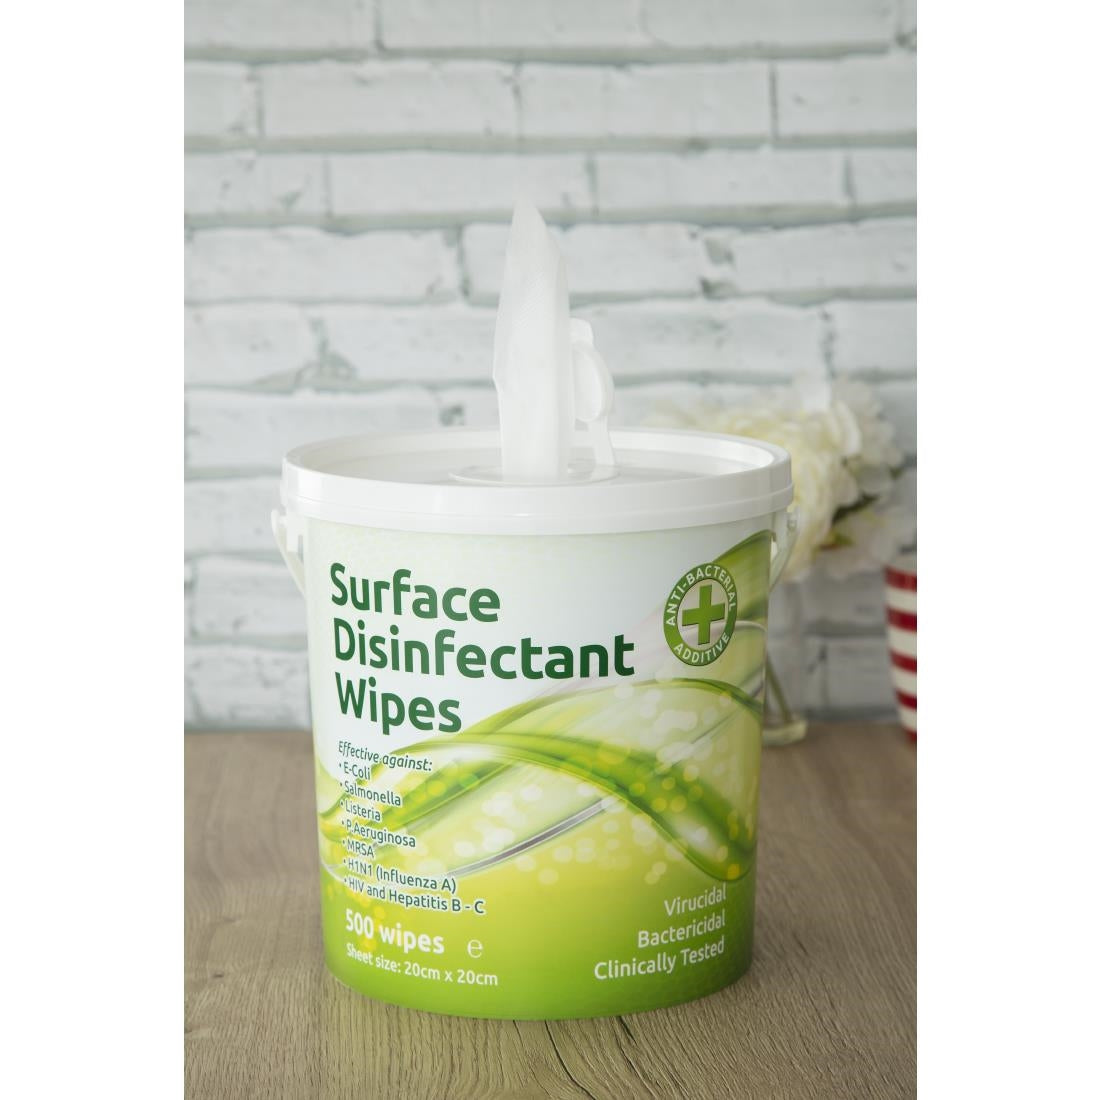 EcoTech Disinfectant Surface Wipes Bucket (500 Pack) JD Catering Equipment Solutions Ltd